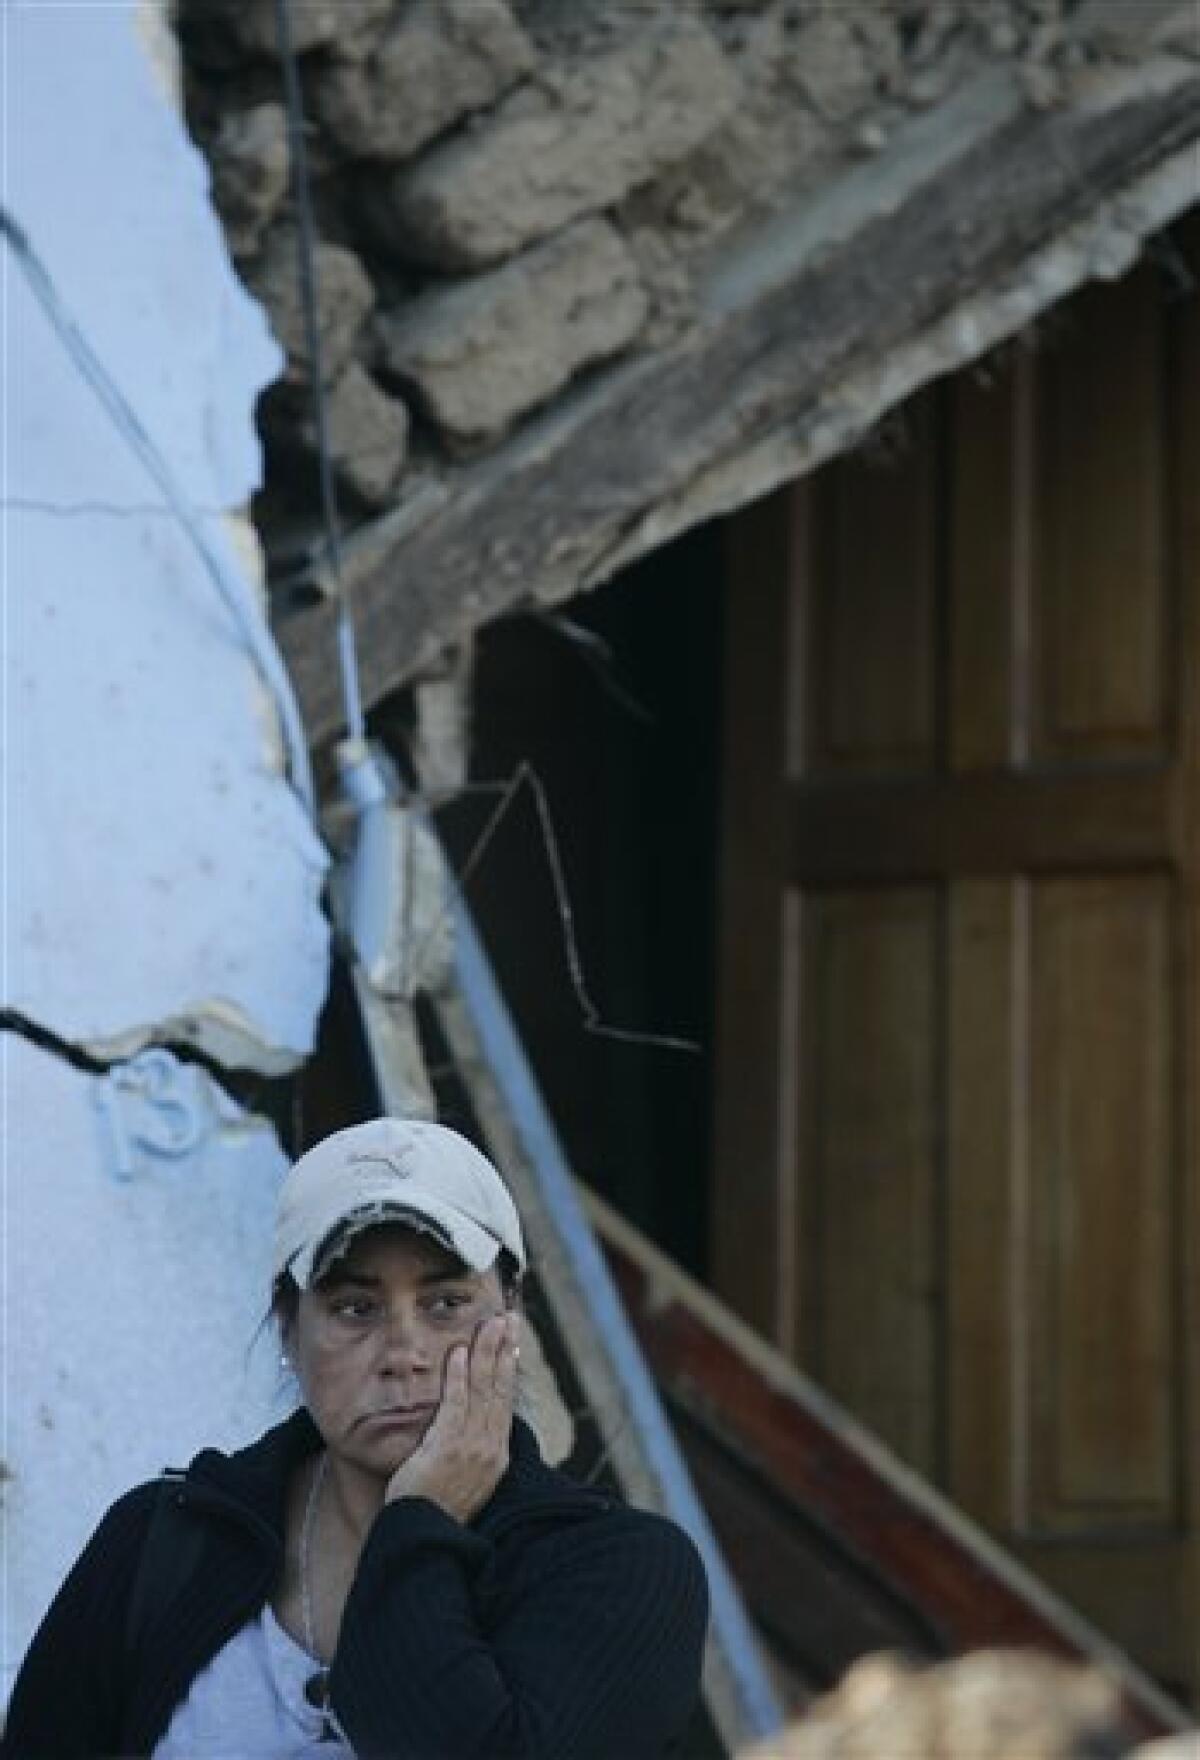 A woman gestures in front of an earthquake damaged house in Constitucion, Chile, Monday, March 8, 2010. An 8.8-magnitude earthquake hit central Chile last Feb. 27, causing widespread damage. (AP Photo/Fernando Vergara)